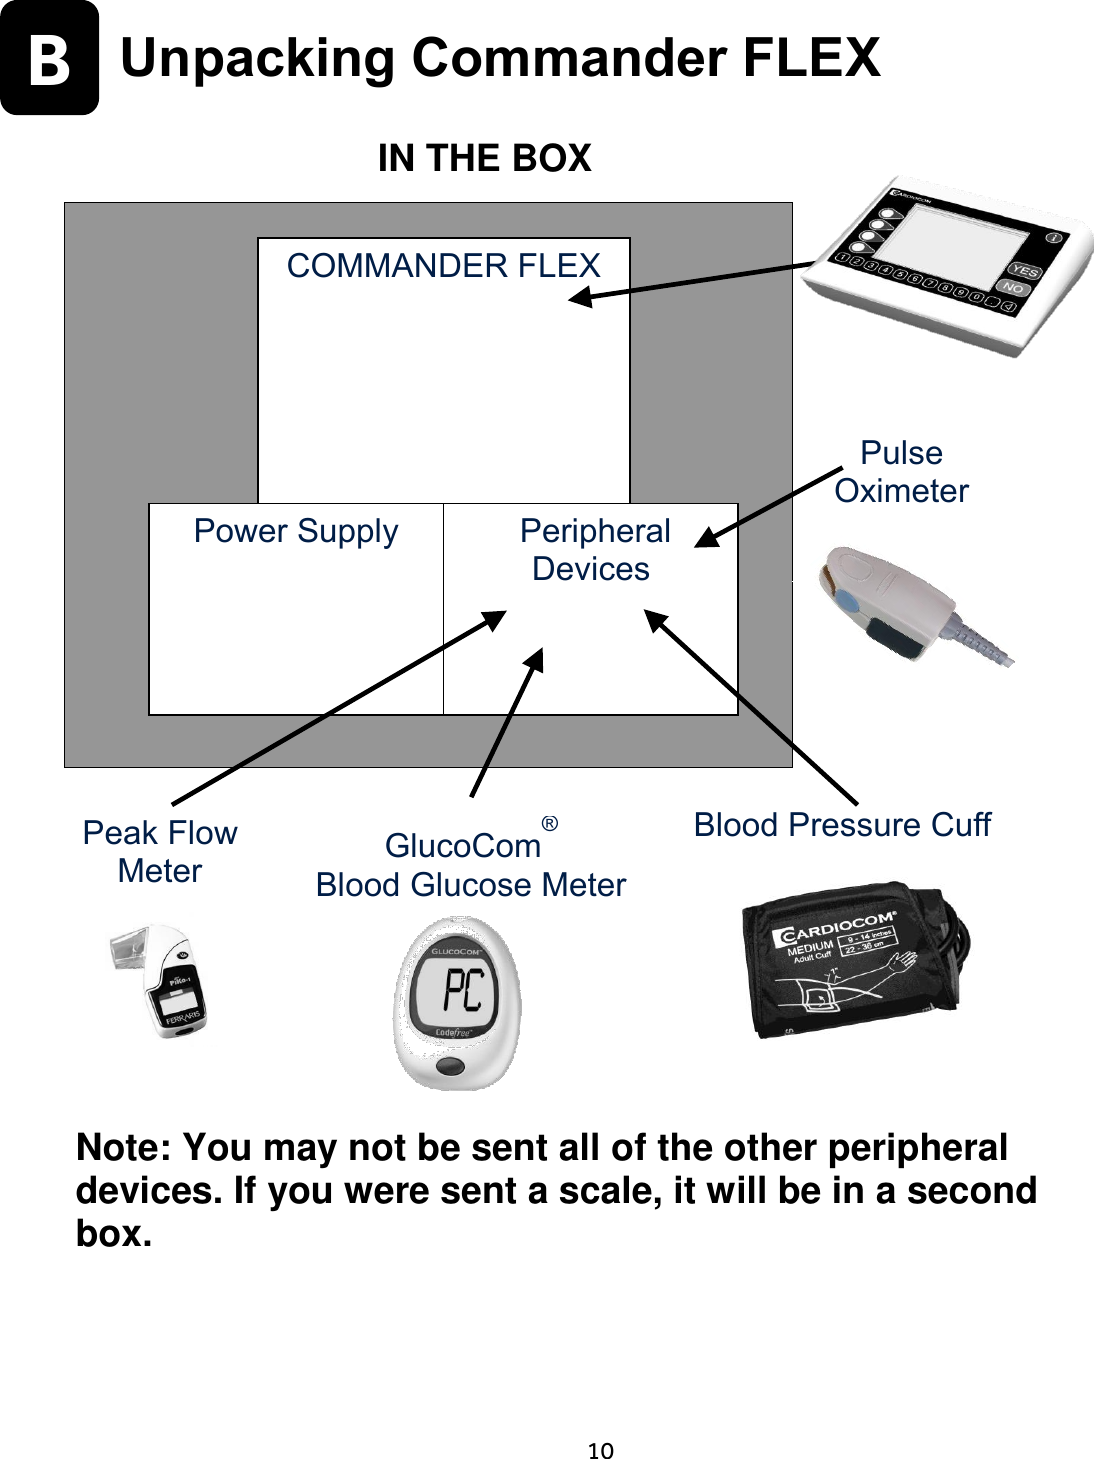     10  B  Unpacking Commander FLEX                               IN THE BOX                       Note: You may not be sent all of the other peripheral devices. If you were sent a scale, it will be in a second box. COMMANDER FLEX  Power Supply  Peripheral Devices Peak Flow  Meter GlucoCom® Blood Glucose Meter Blood Pressure Cuff Pulse Oximeter 